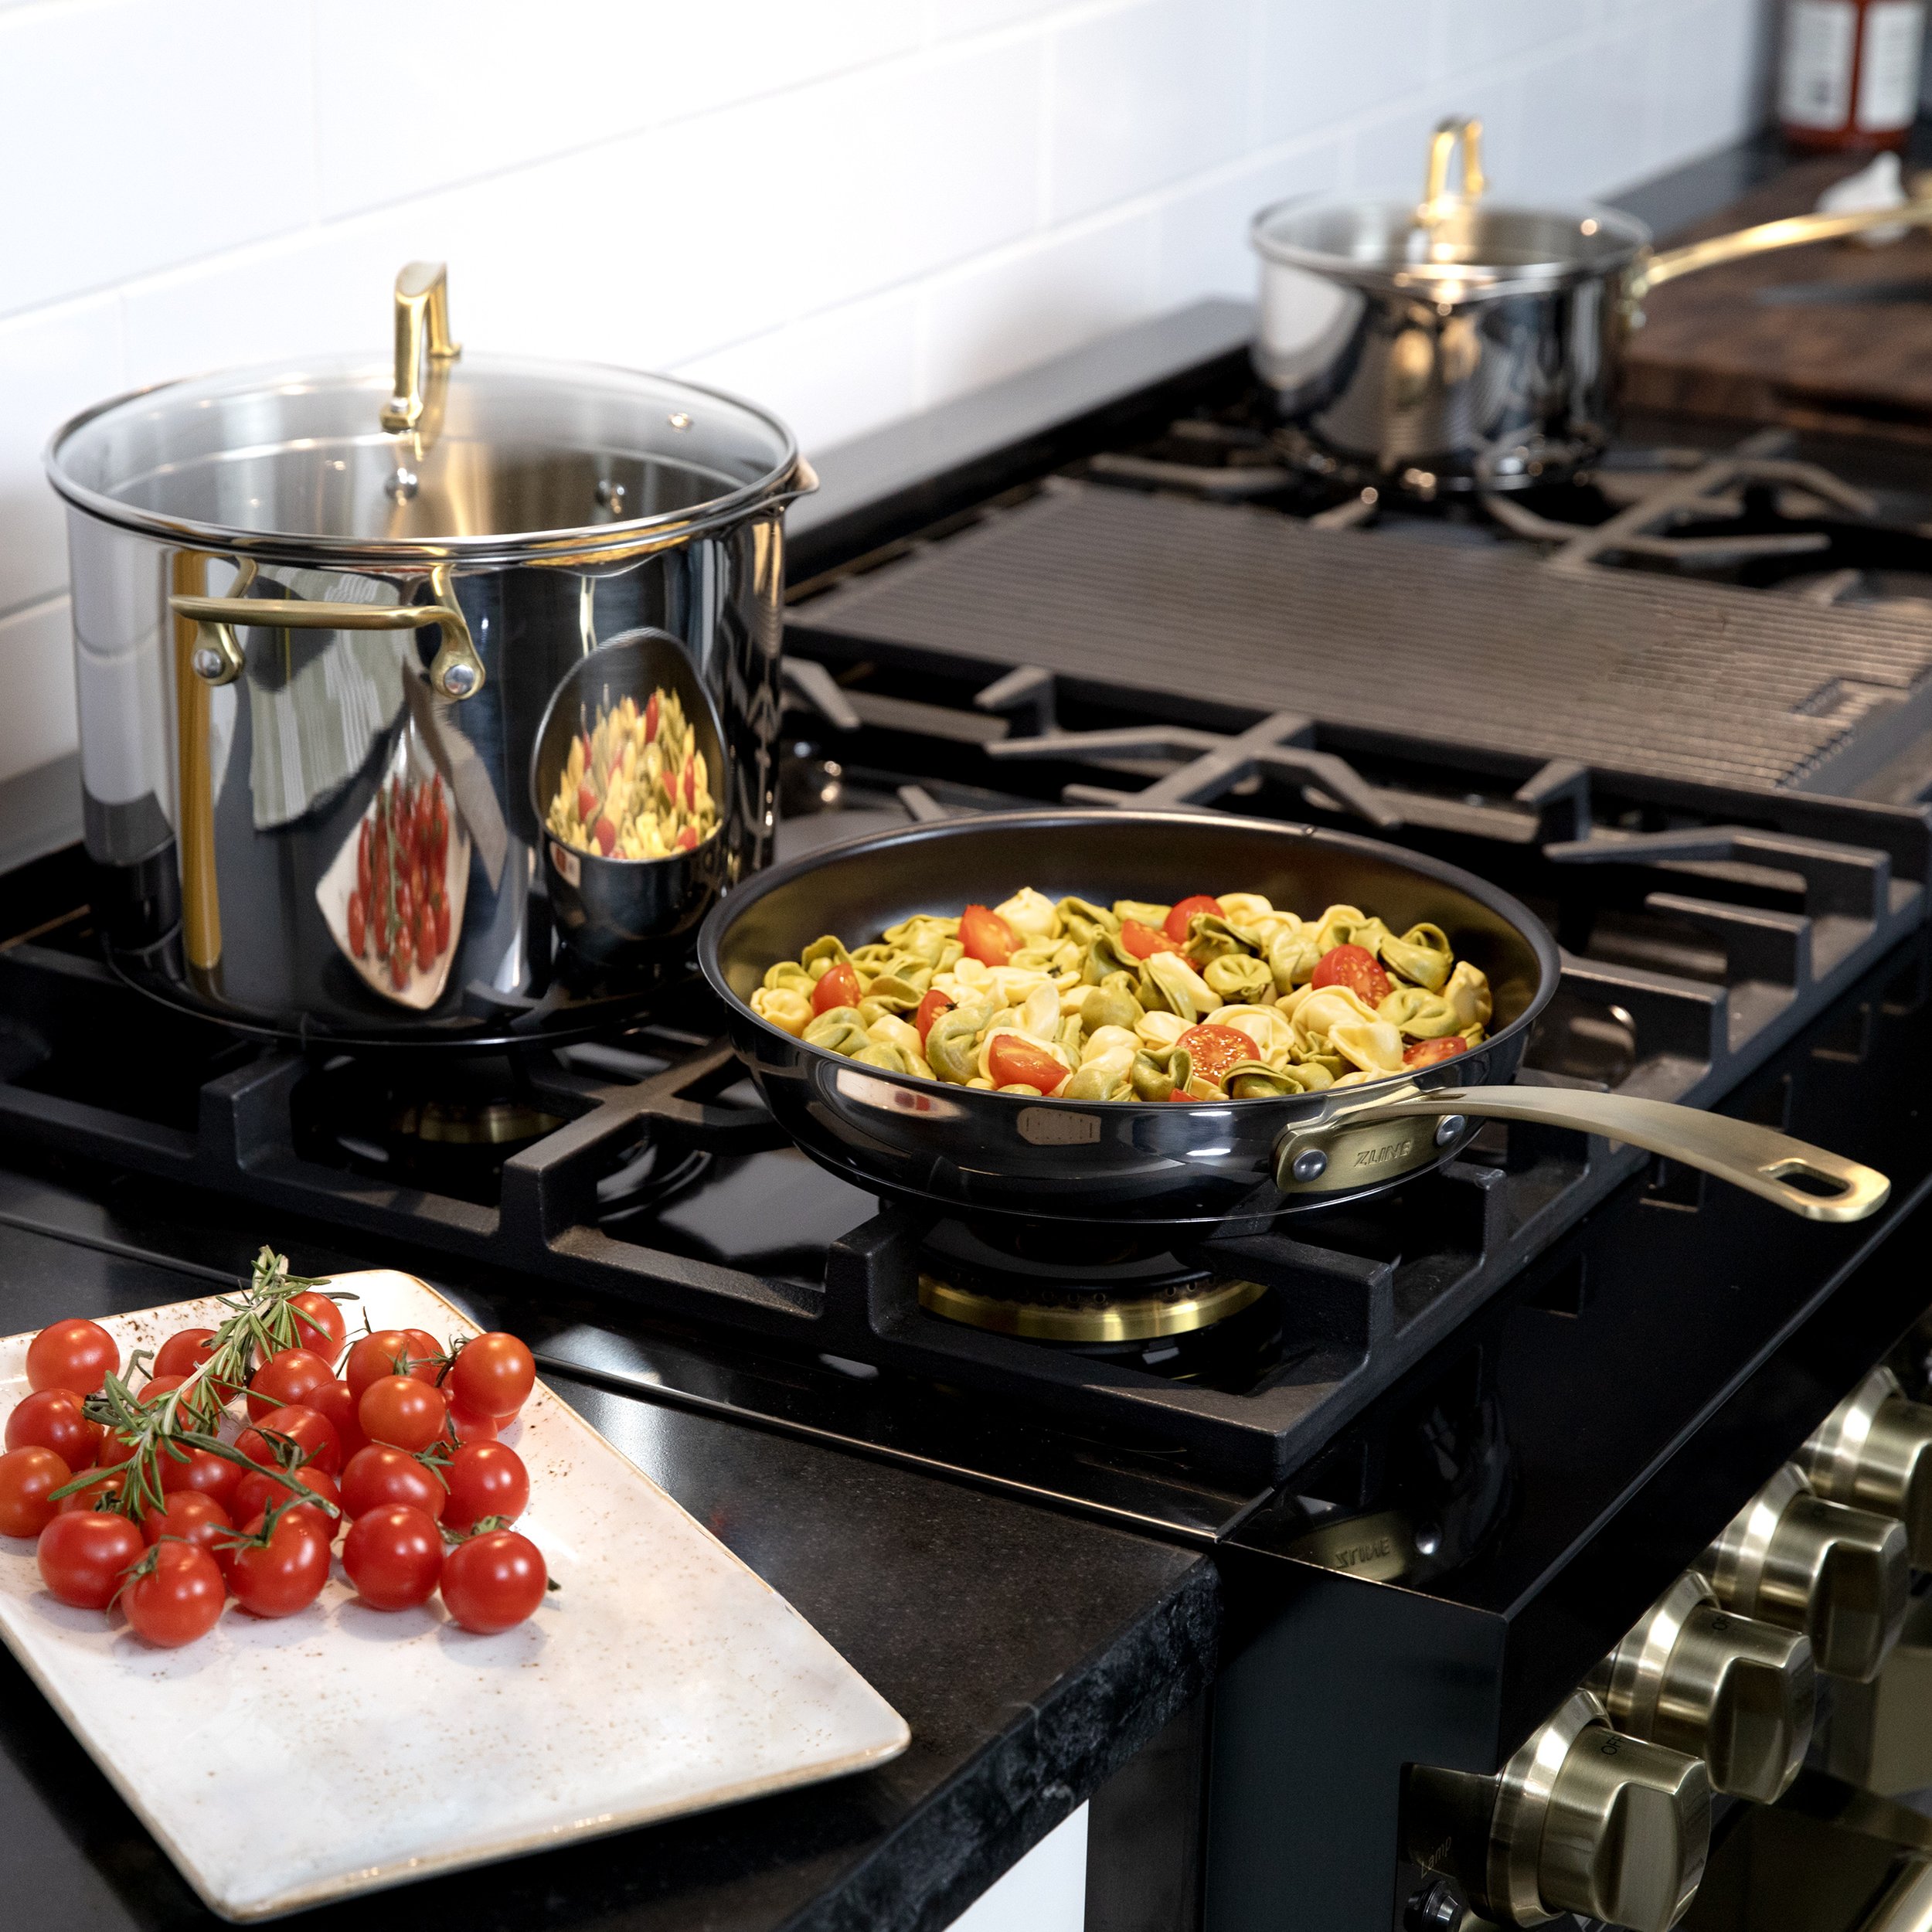 Cookware Collections